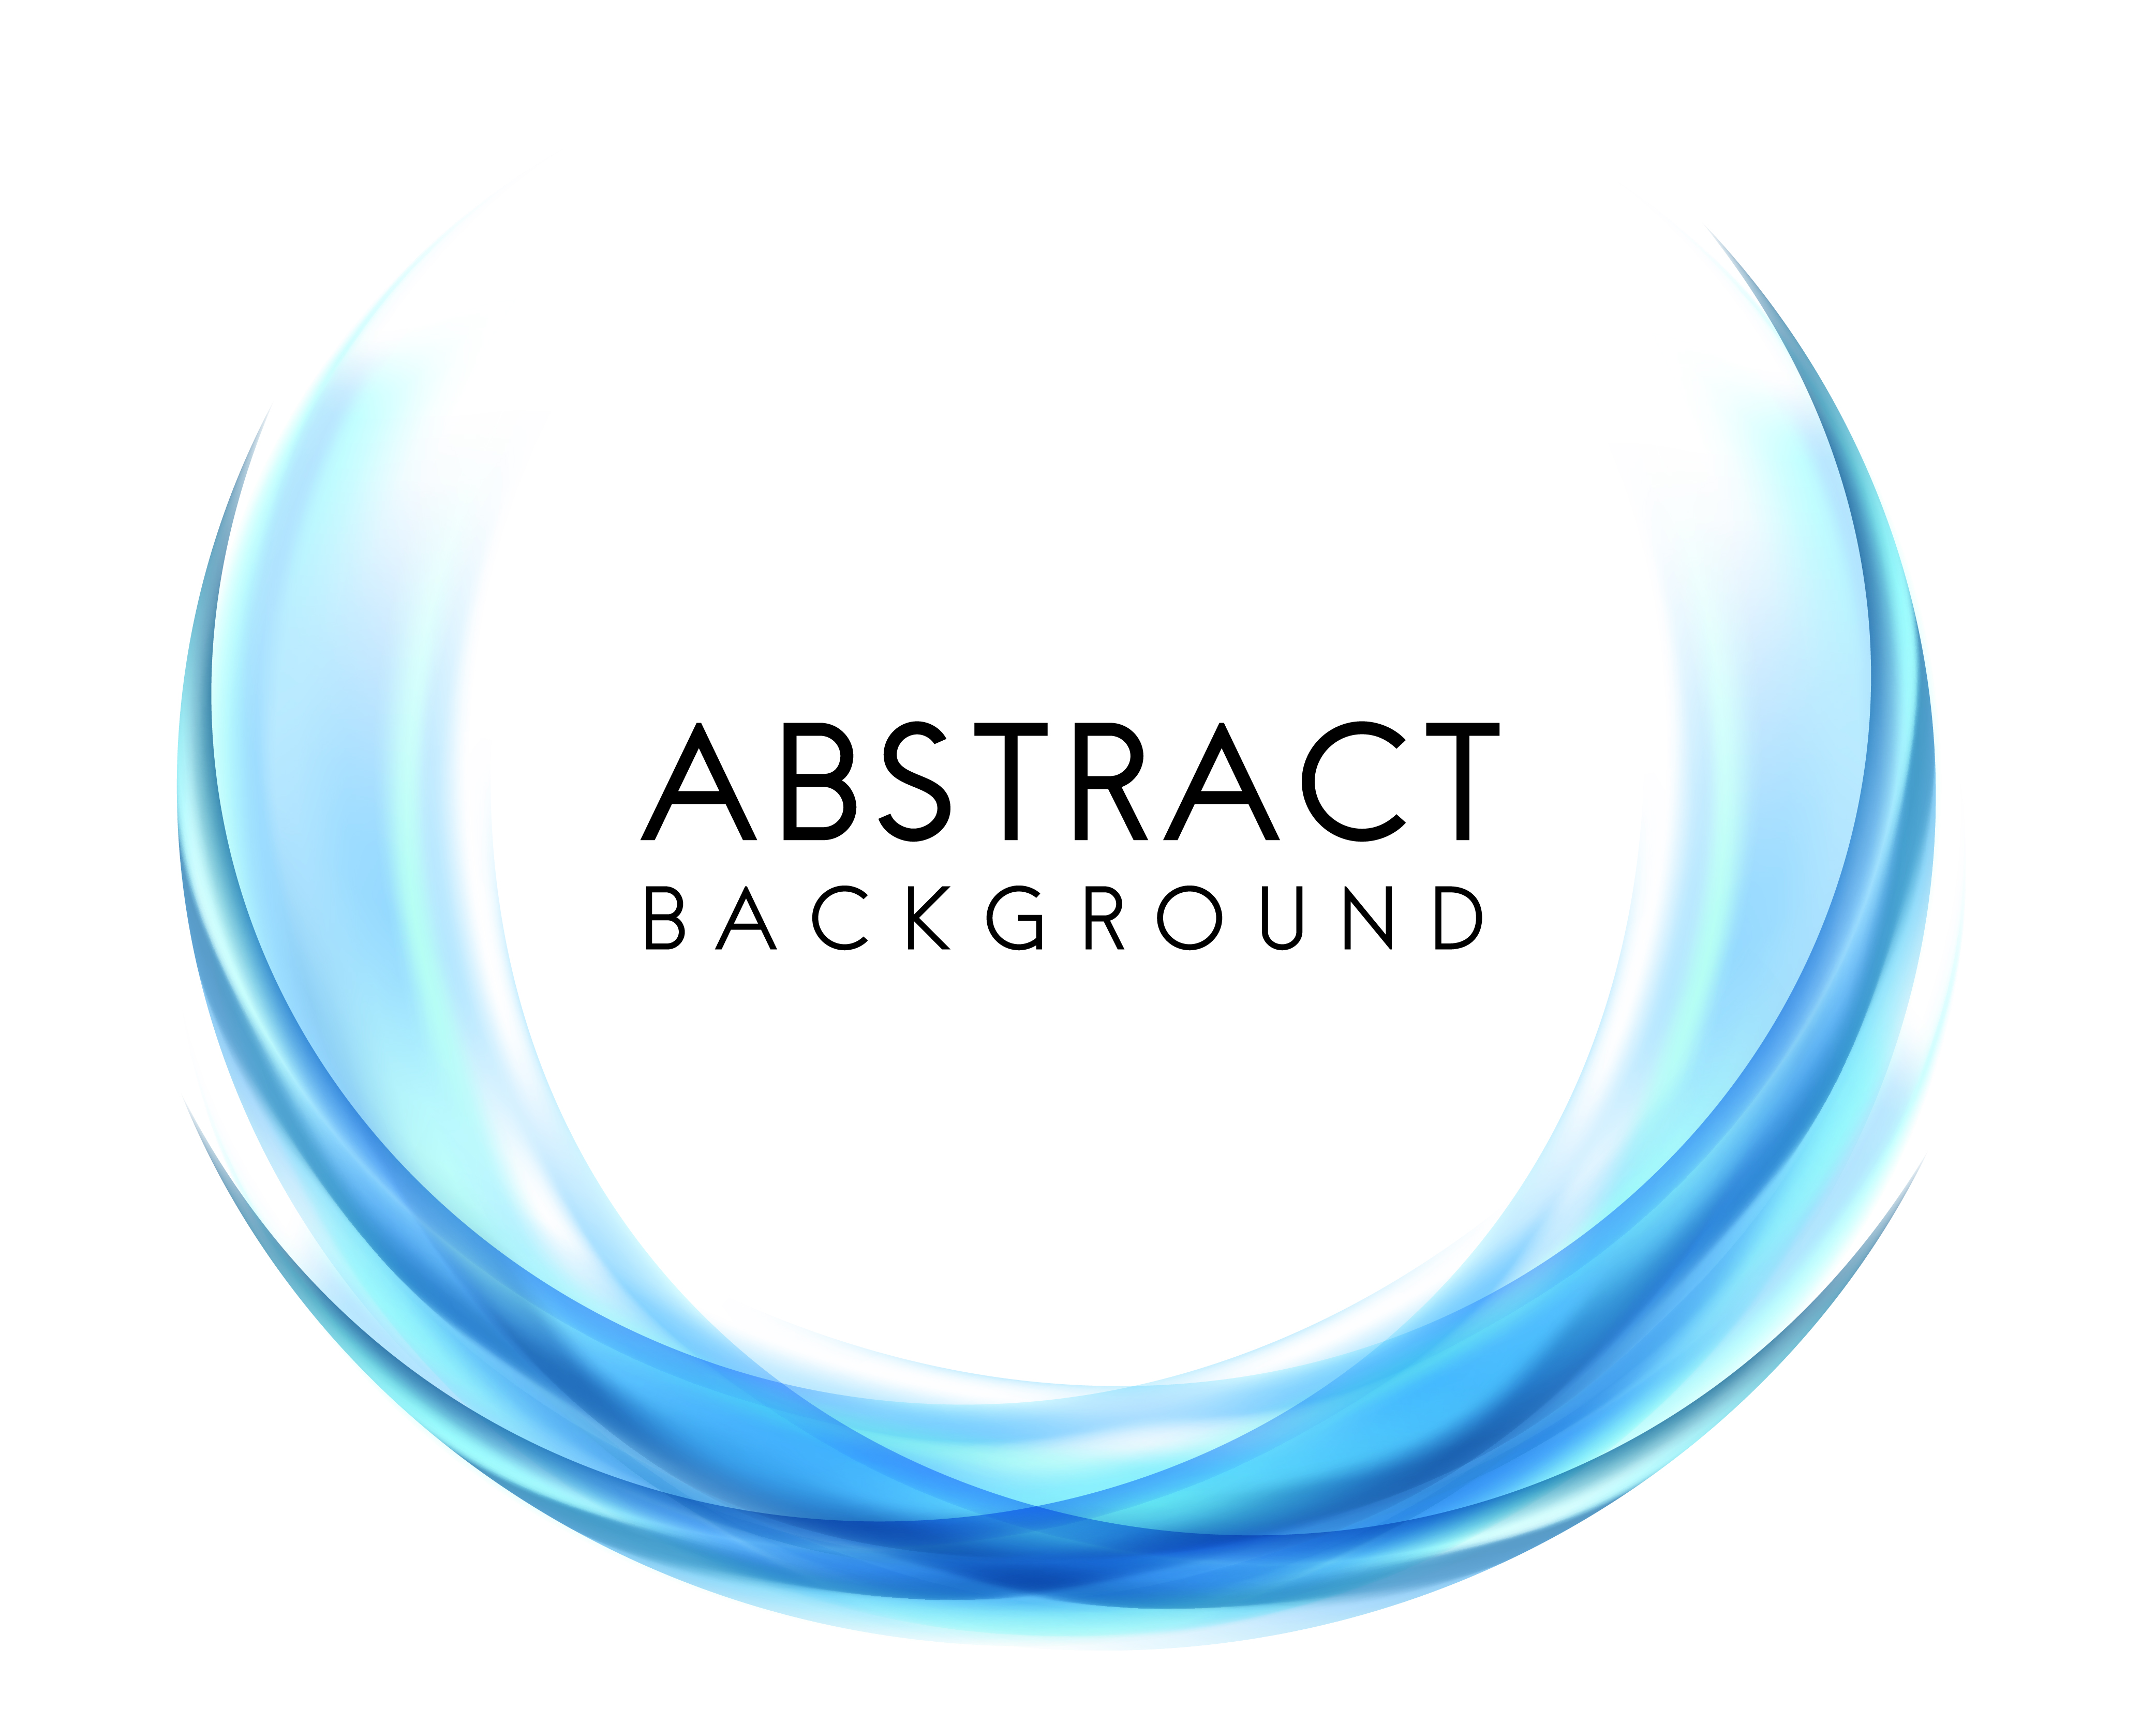 Abstract background design in blue - Download Free Vectors, Clipart